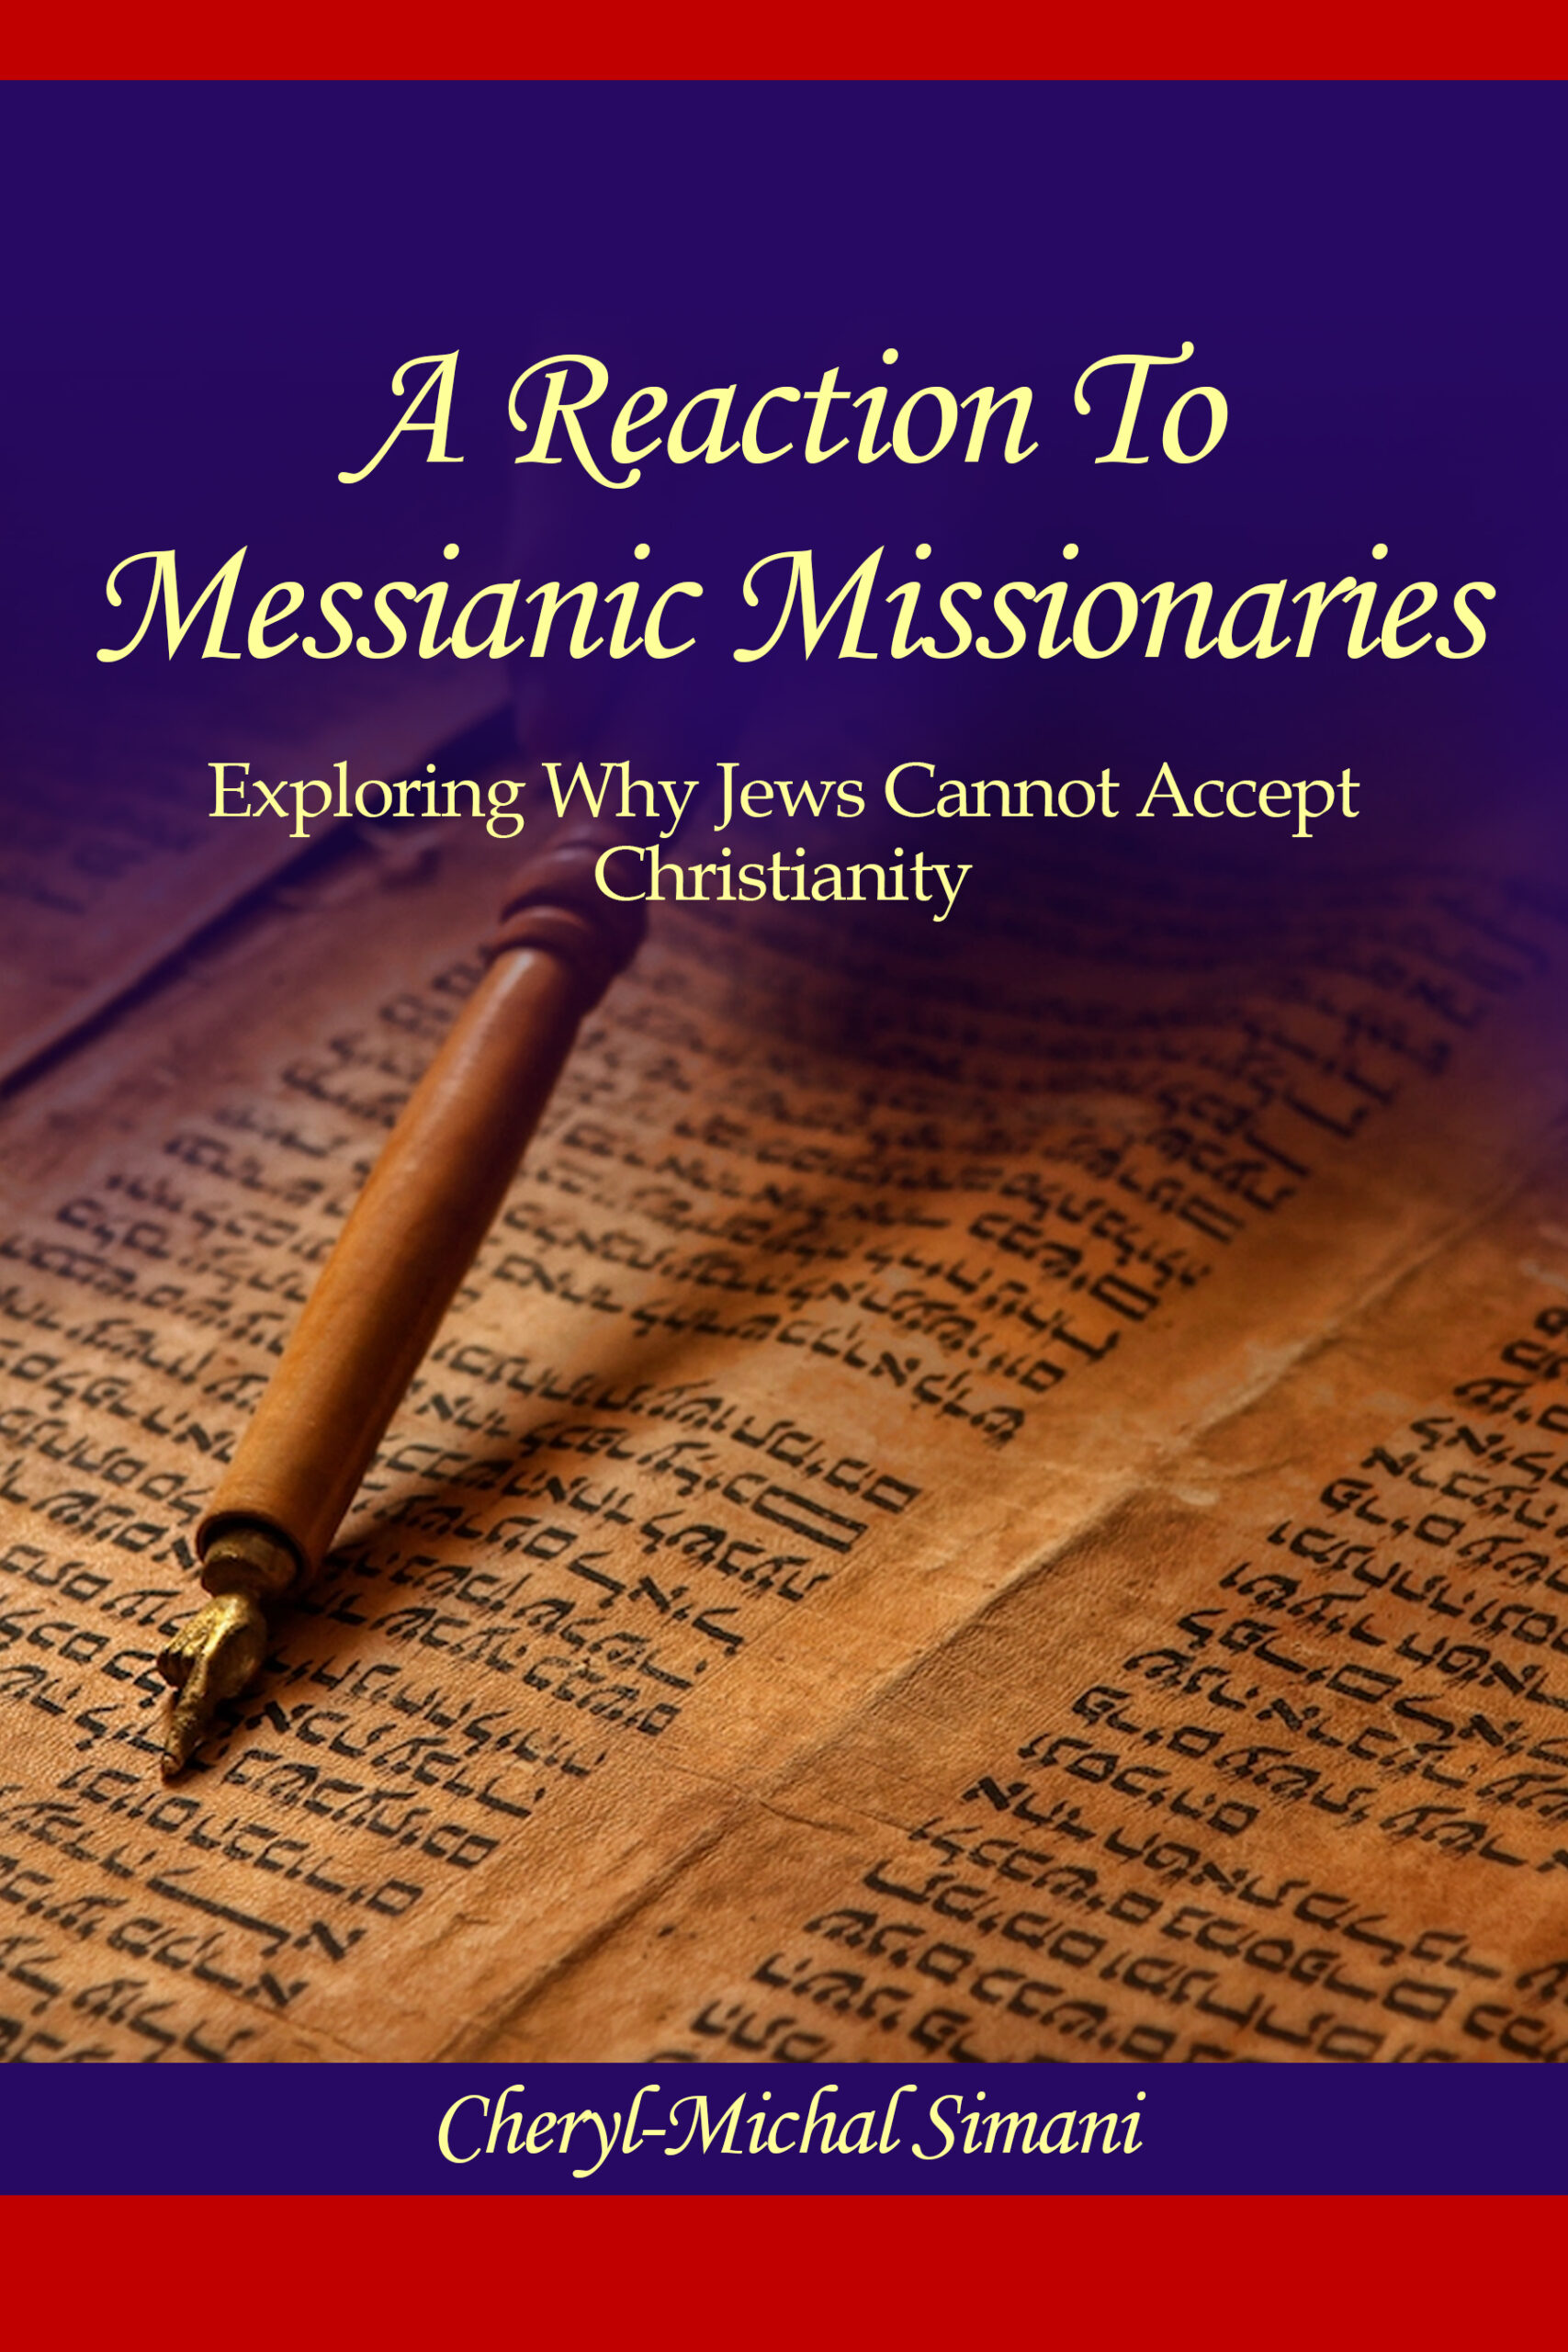 A Reaction to Messianic Missionaries by Cheryl-Michal Simani